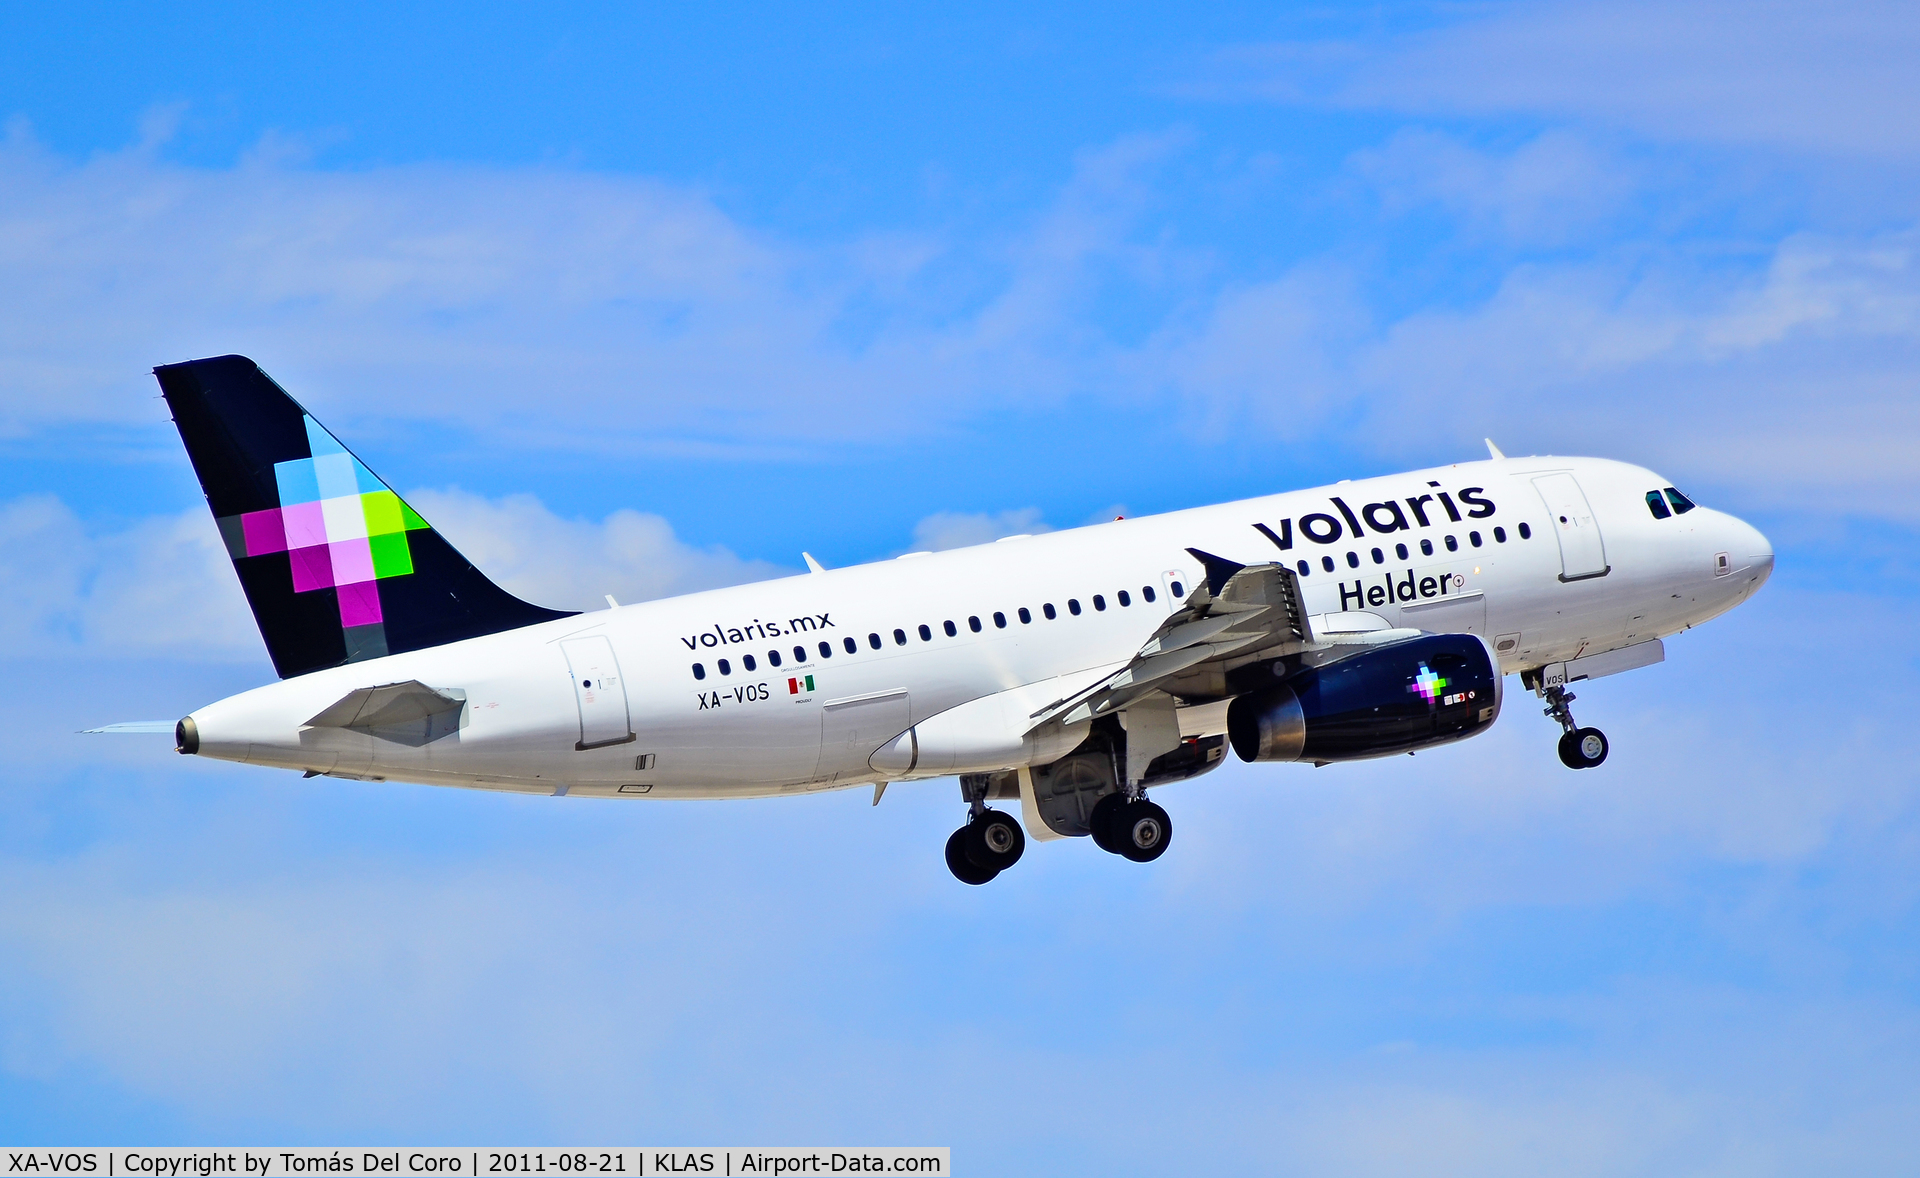 XA-VOS, 2007 Airbus A319-132 C/N 3252, (New photo with a name)
Volaris Airlines XA-VOS 2007 Airbus 319-132 C/N 3252 